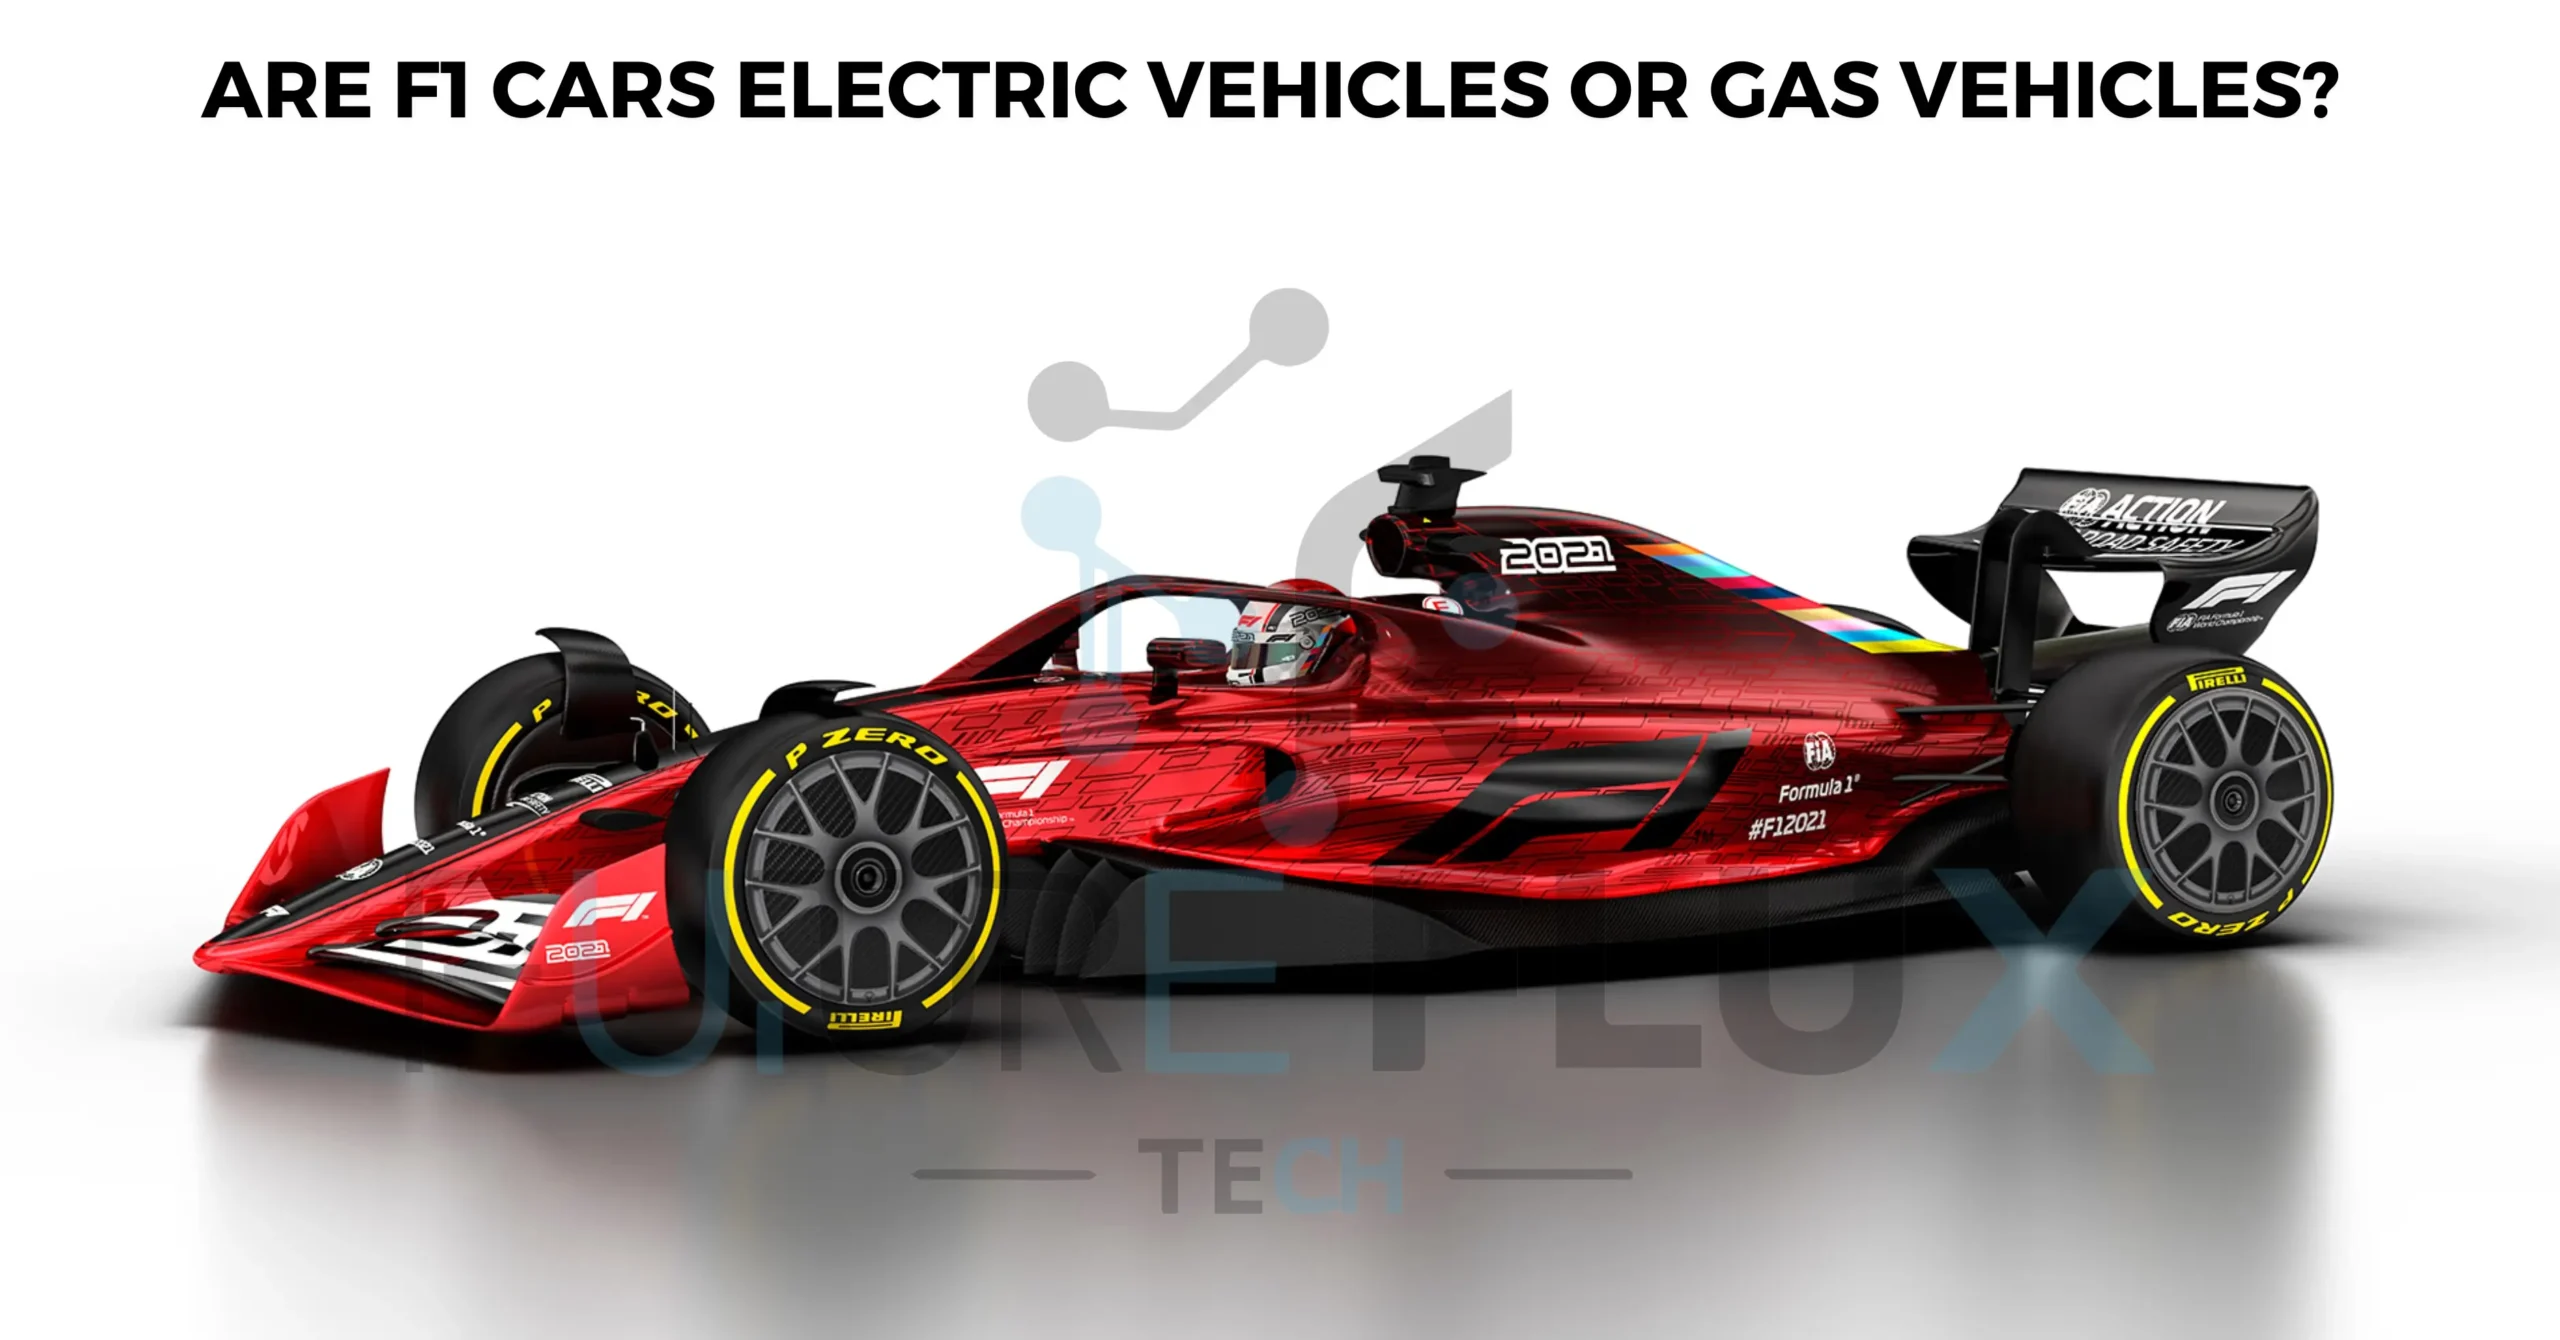 Are F1 Cars Electric Vehicles or Gas Vehicles?